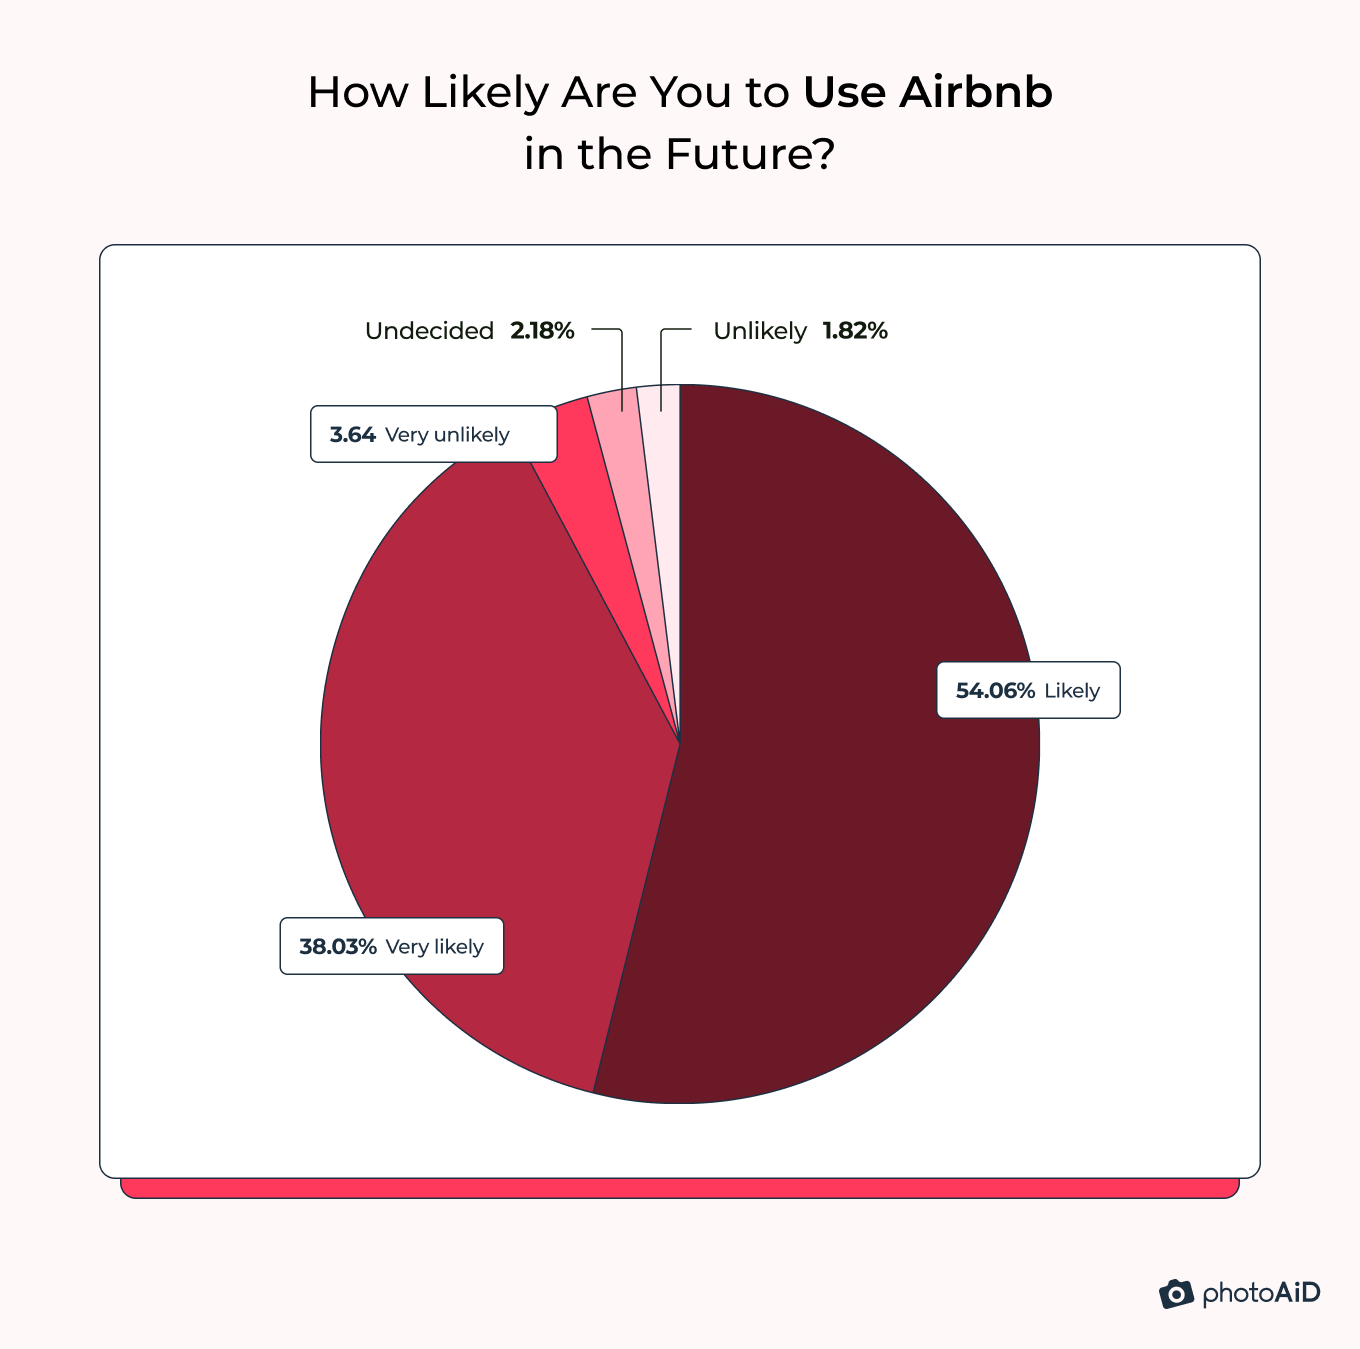 A vast majority of respondents are likely or very likely to use Airbnb in the future